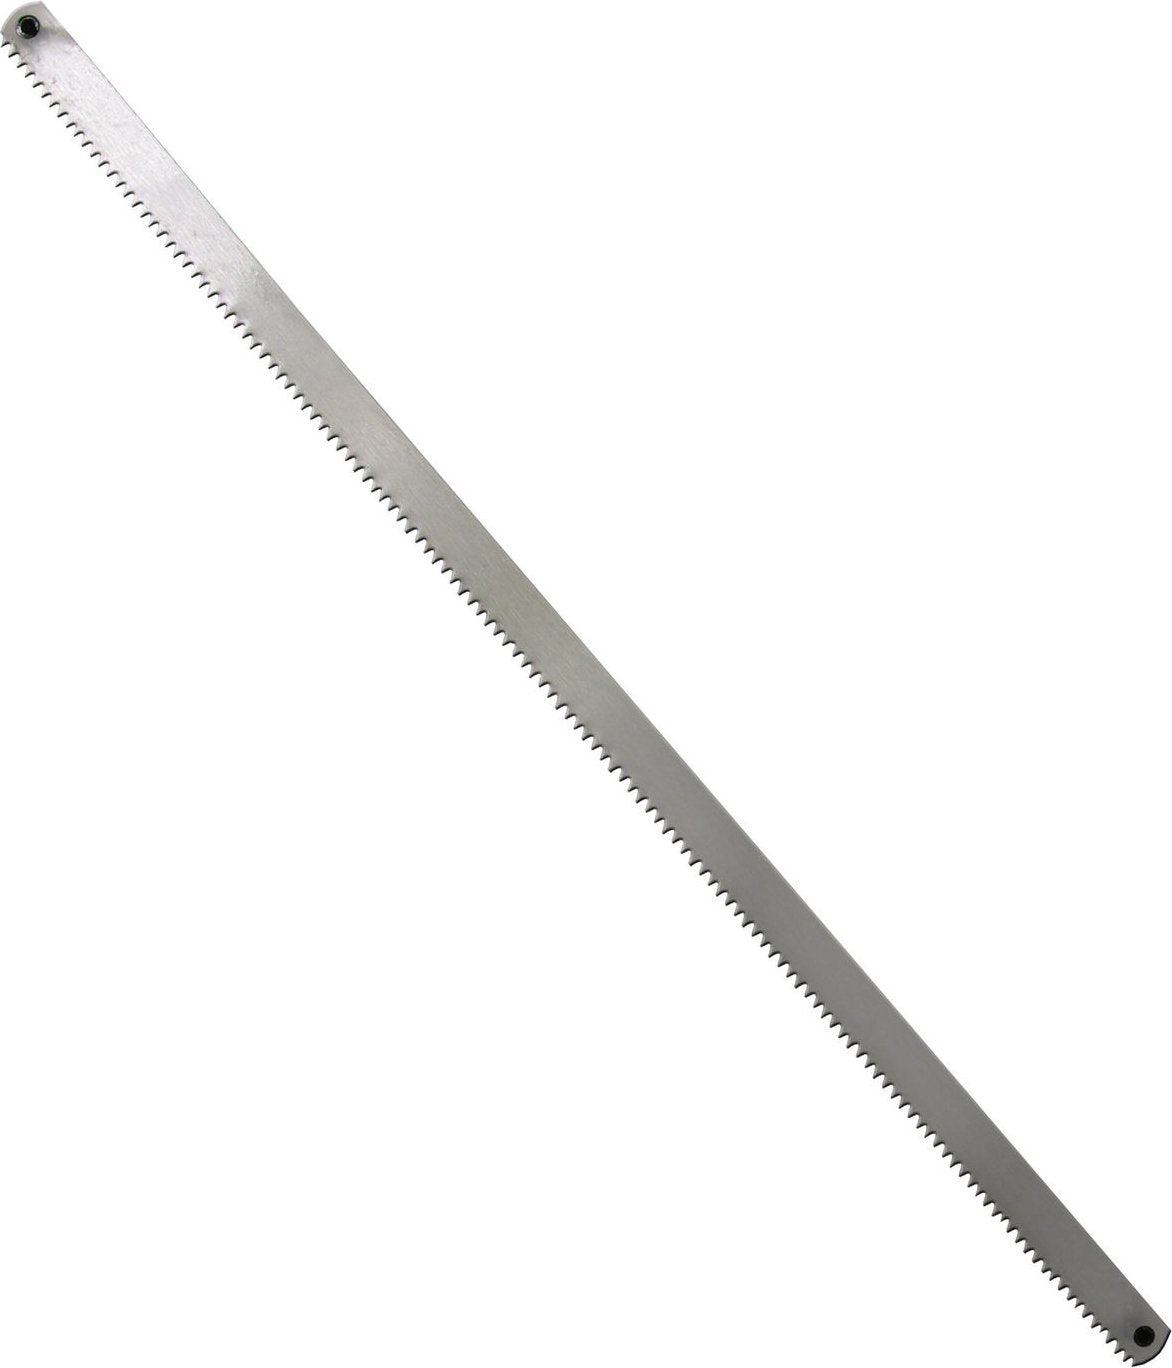 Weston - 22" Stainless Steel Butcher Saw Replacement Blade - 47-2202 - DISCONTINUED